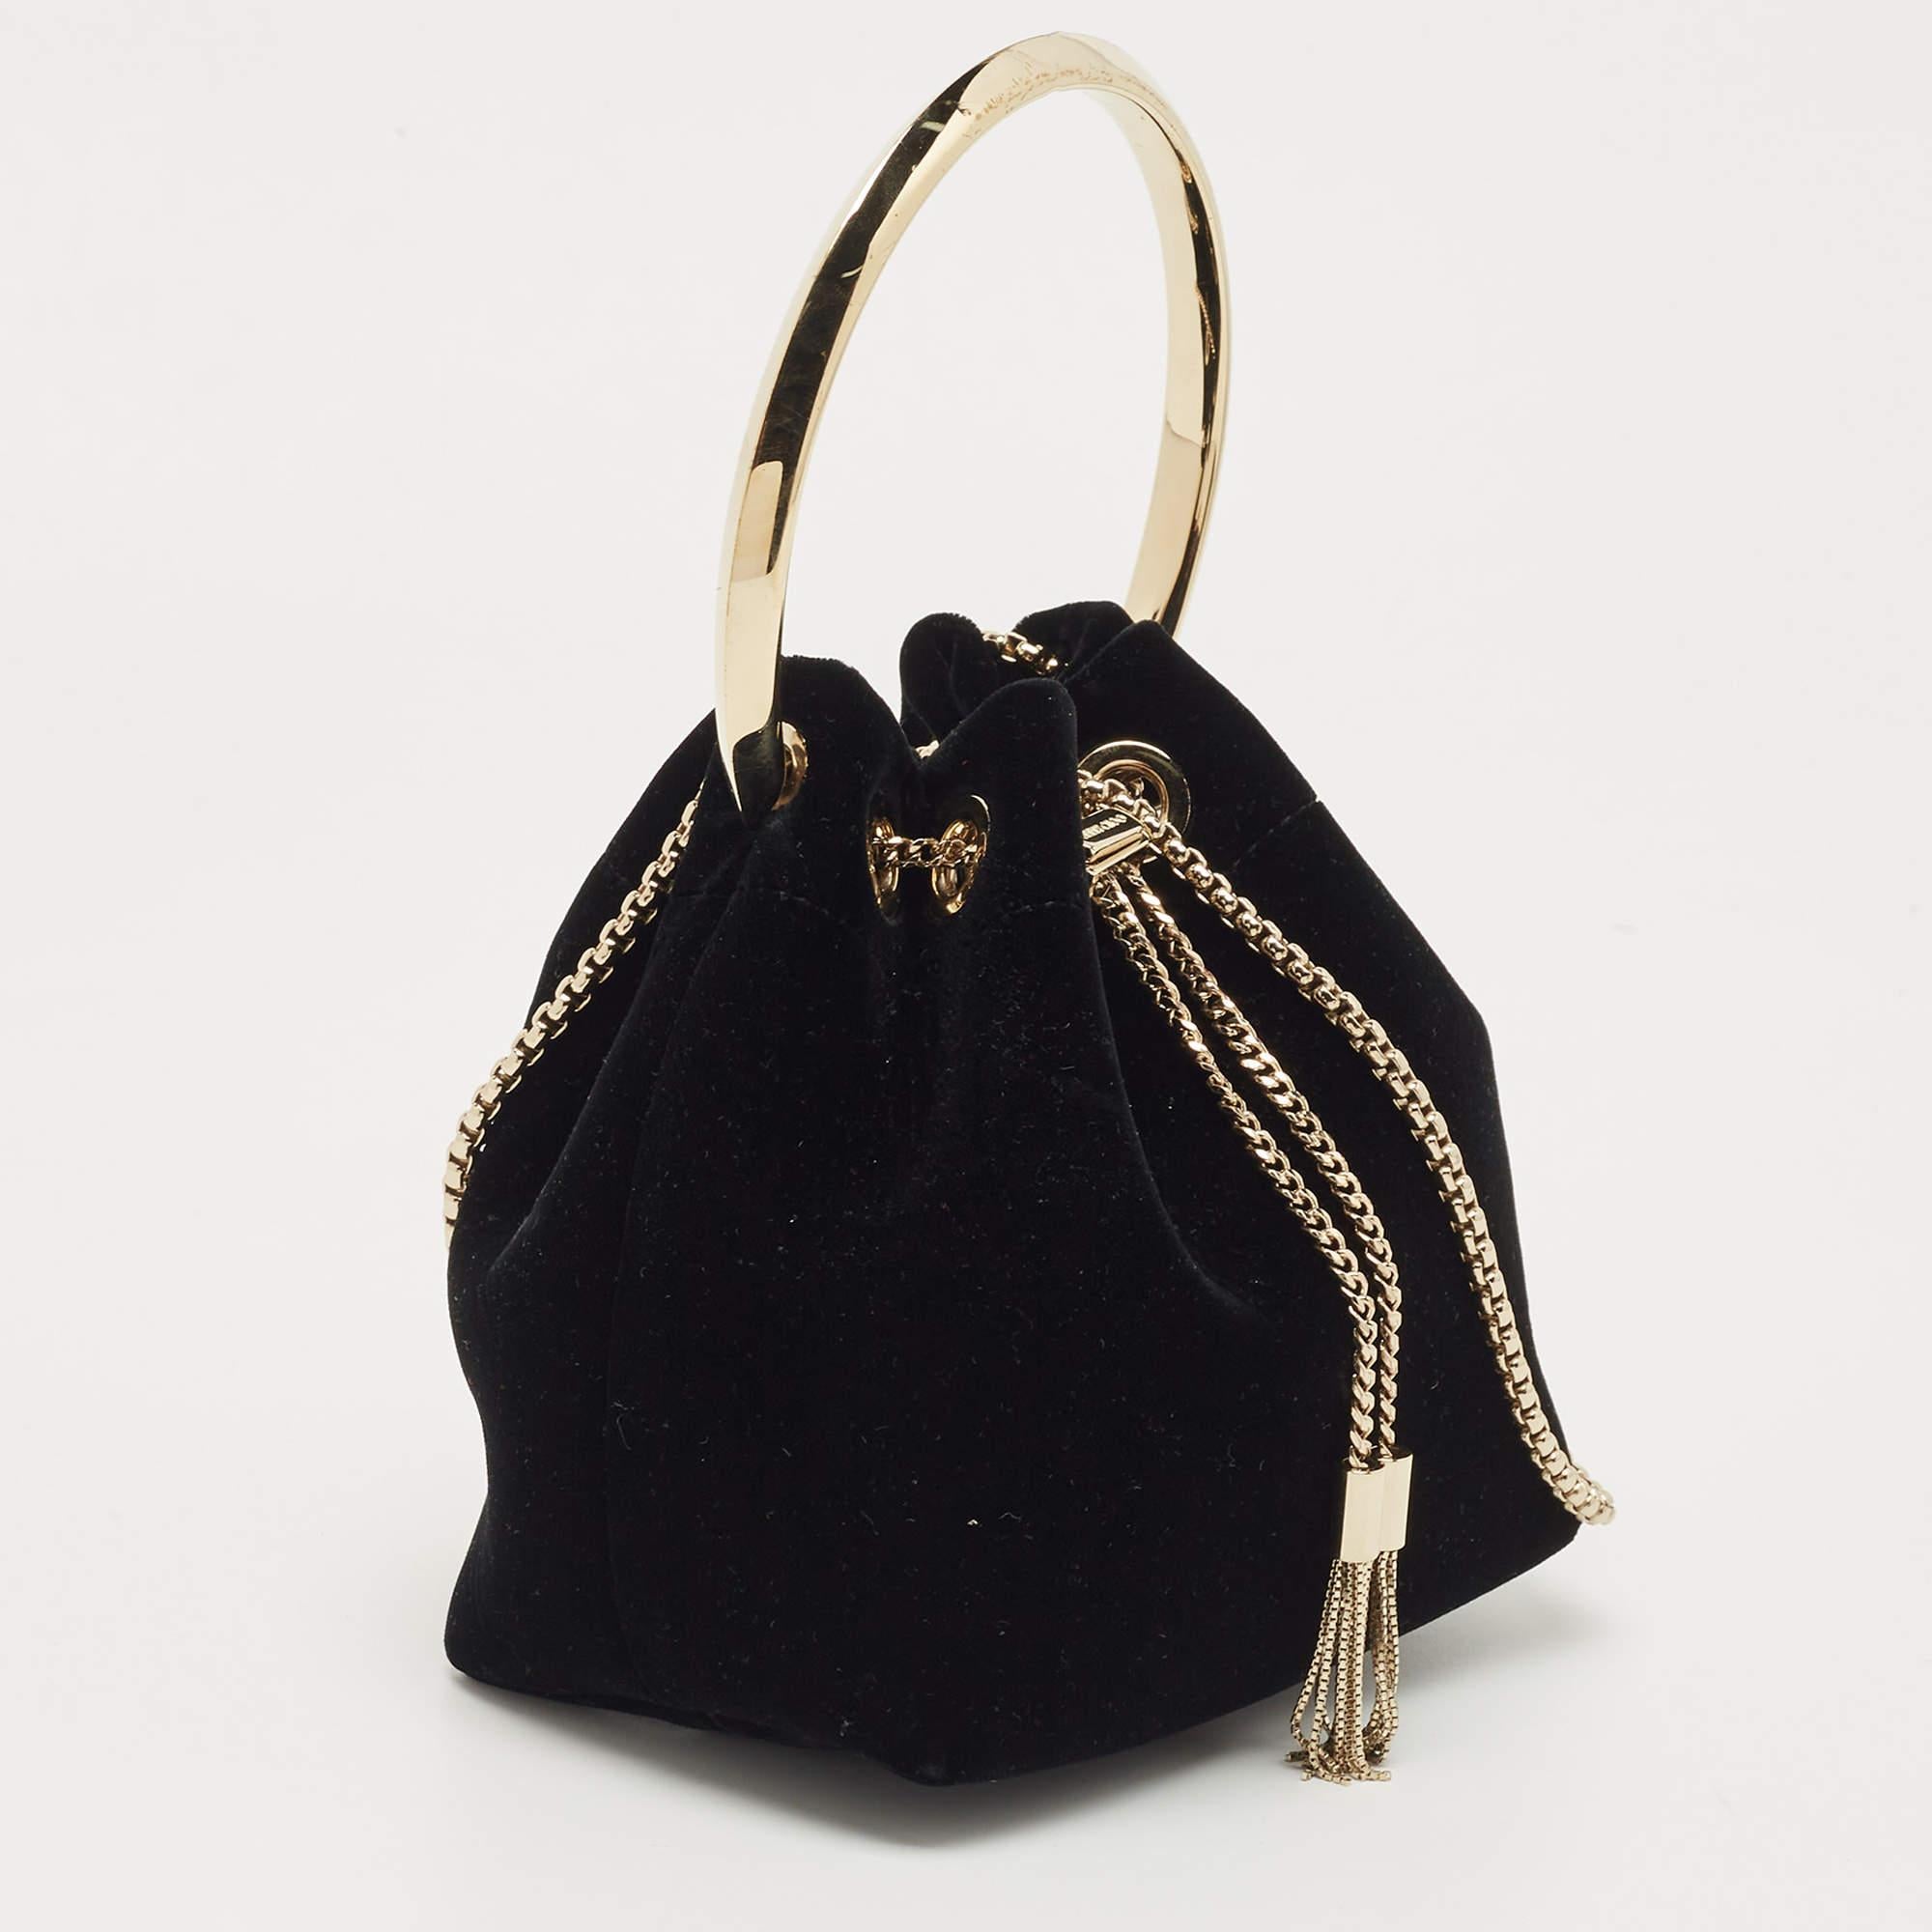 Jimmy Choo's BonBon has a classy silhouette and a glamorous appeal. Constructed using velvet, the bag has a drawstring closure. The gold-tone metal handle and chain act as the design's highlight.

